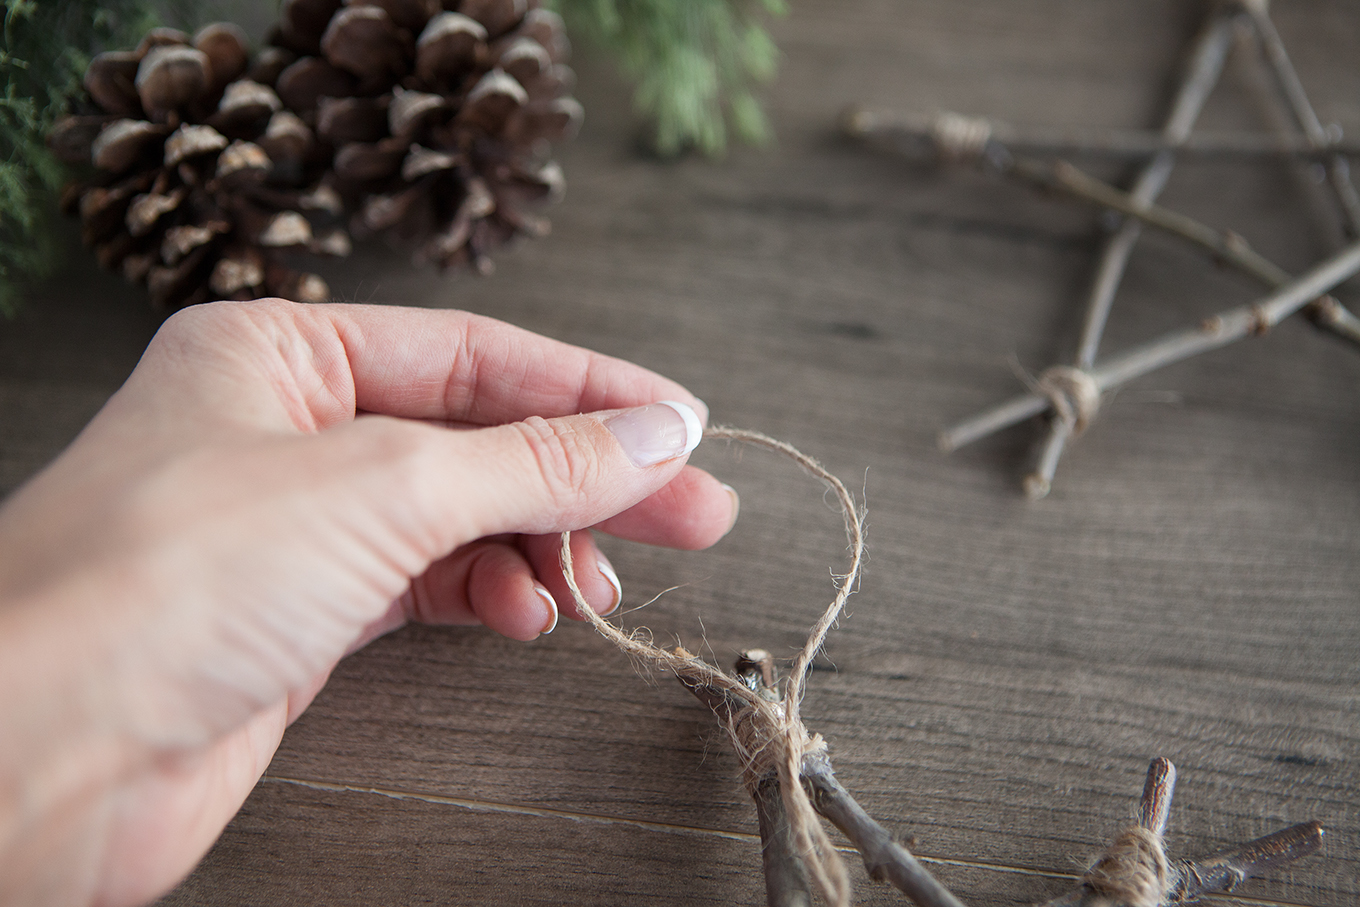 Bring a touch of nature indoors this year as you decorate your tree – learn how to make rustic twig Christmas ornaments! They're simple, inexpensive and look beautiful!